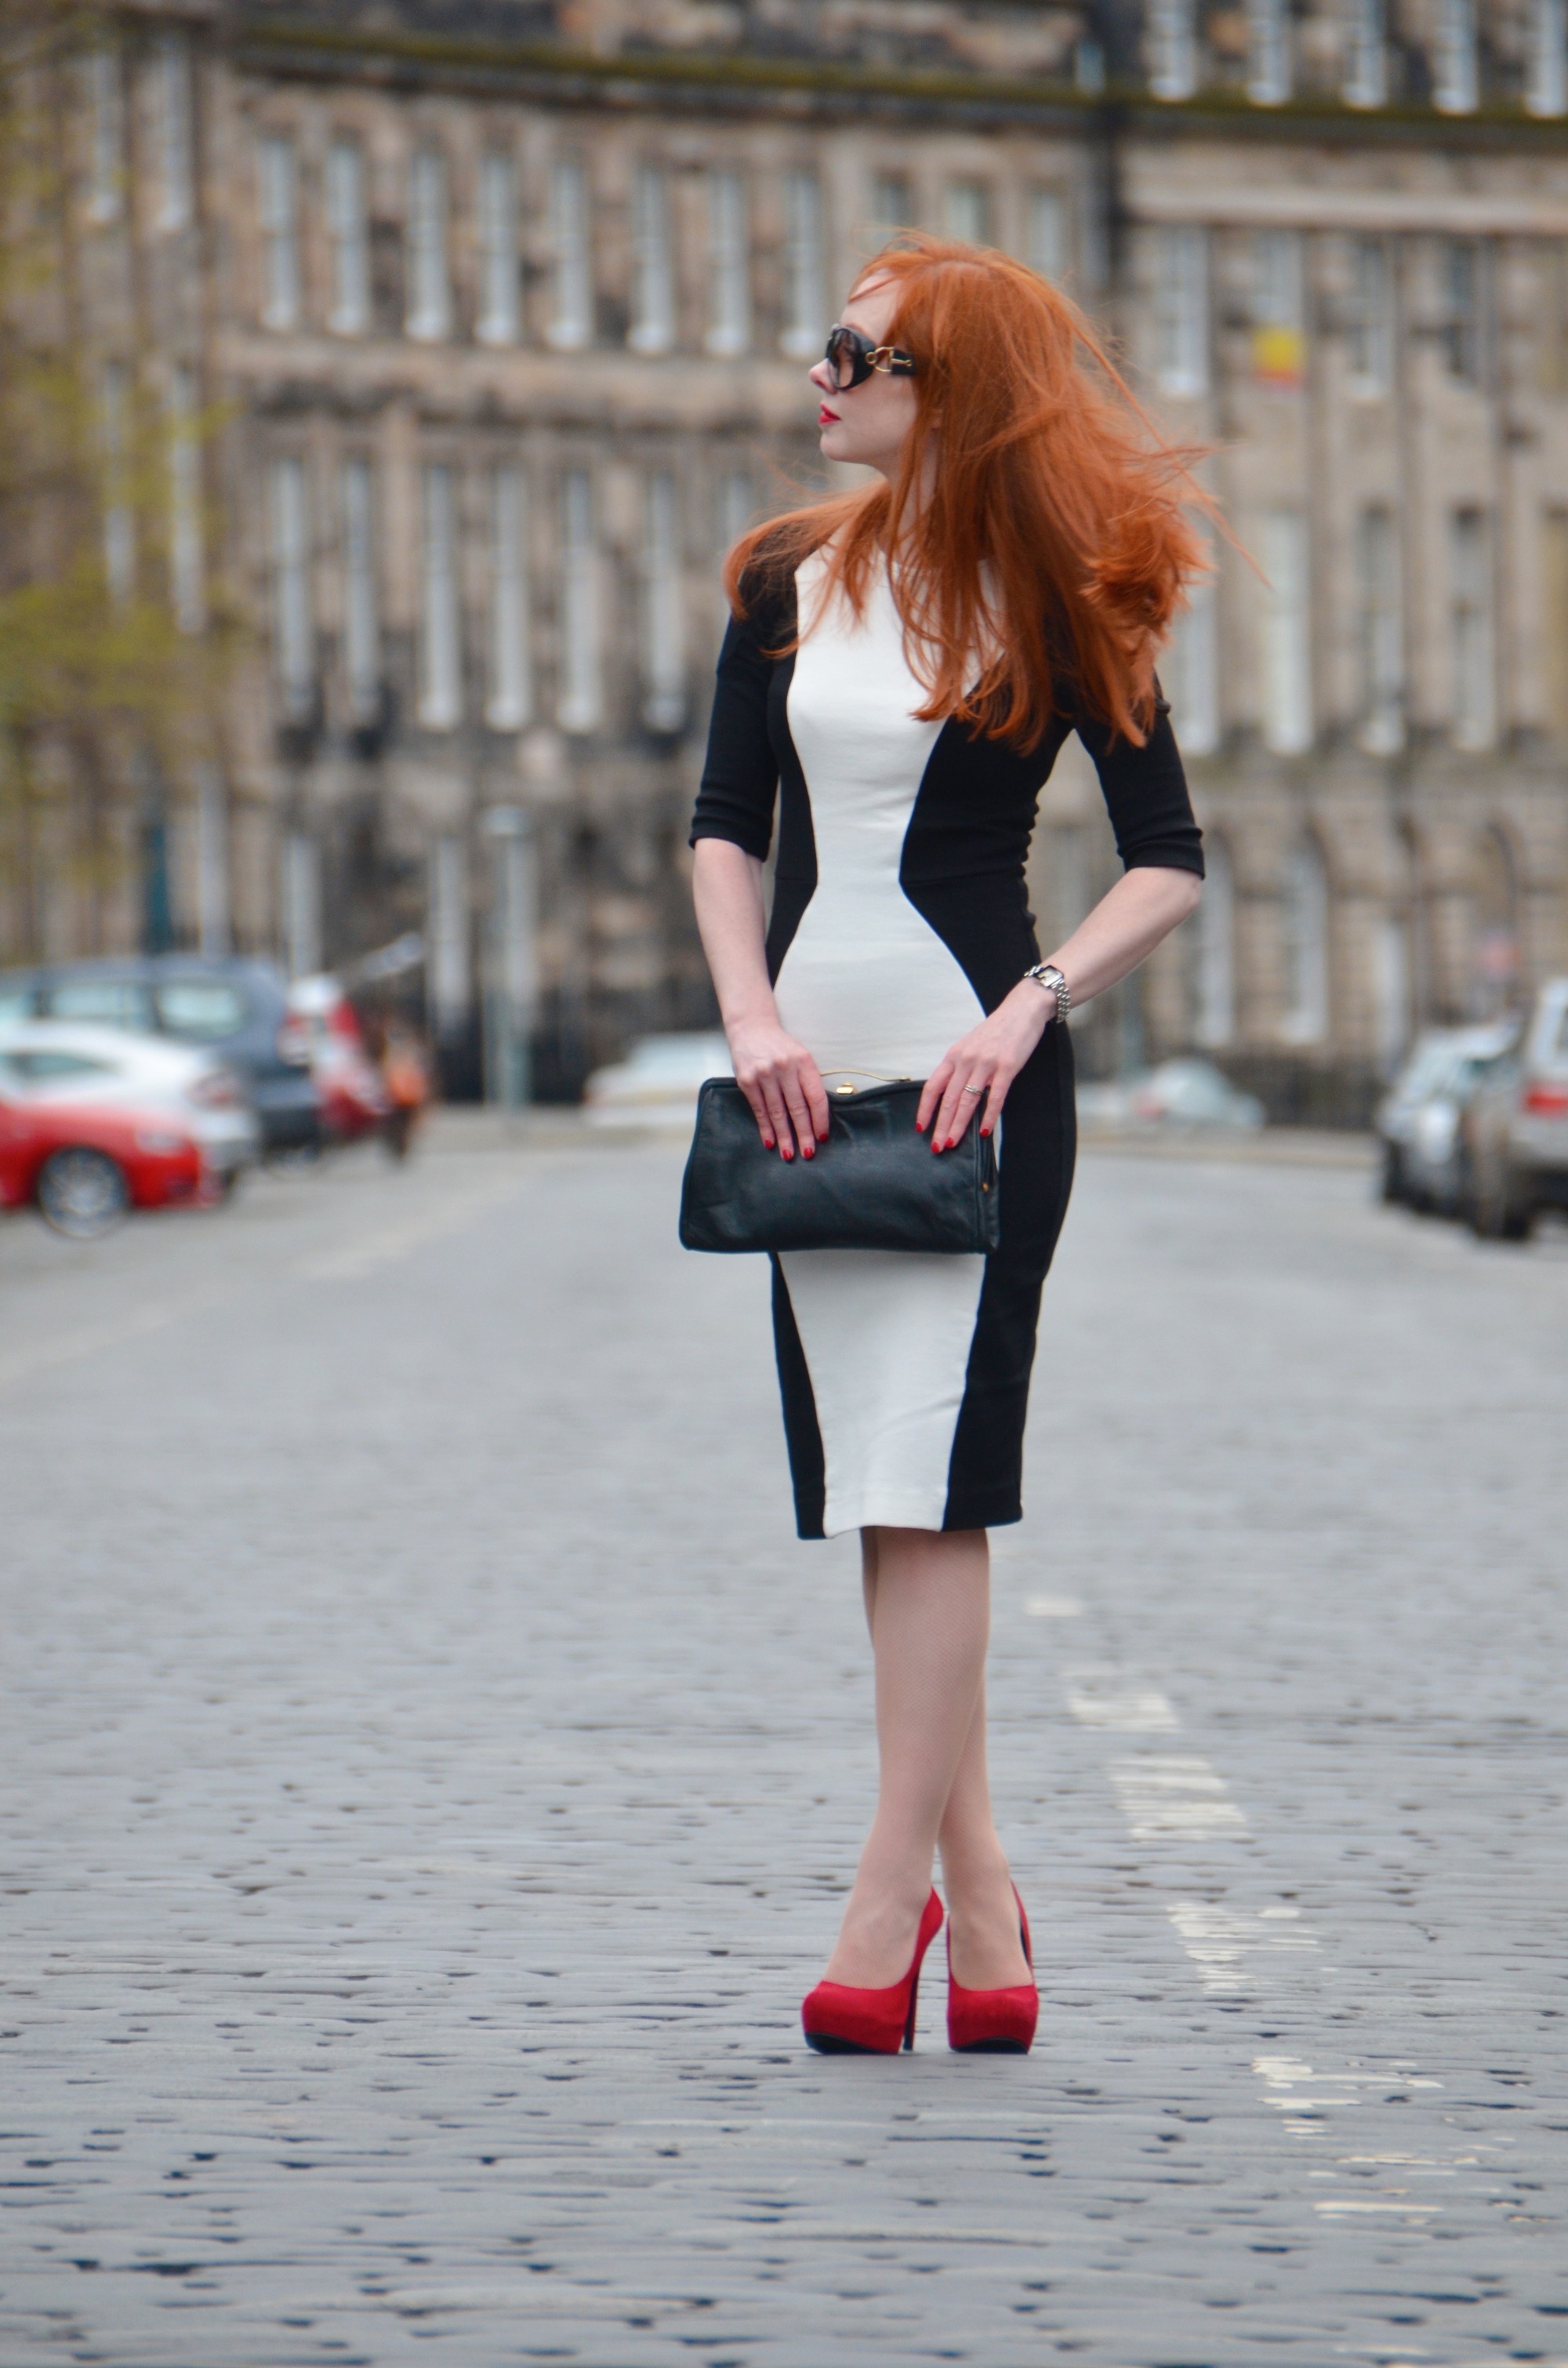 black and white dress with red high heel shoes